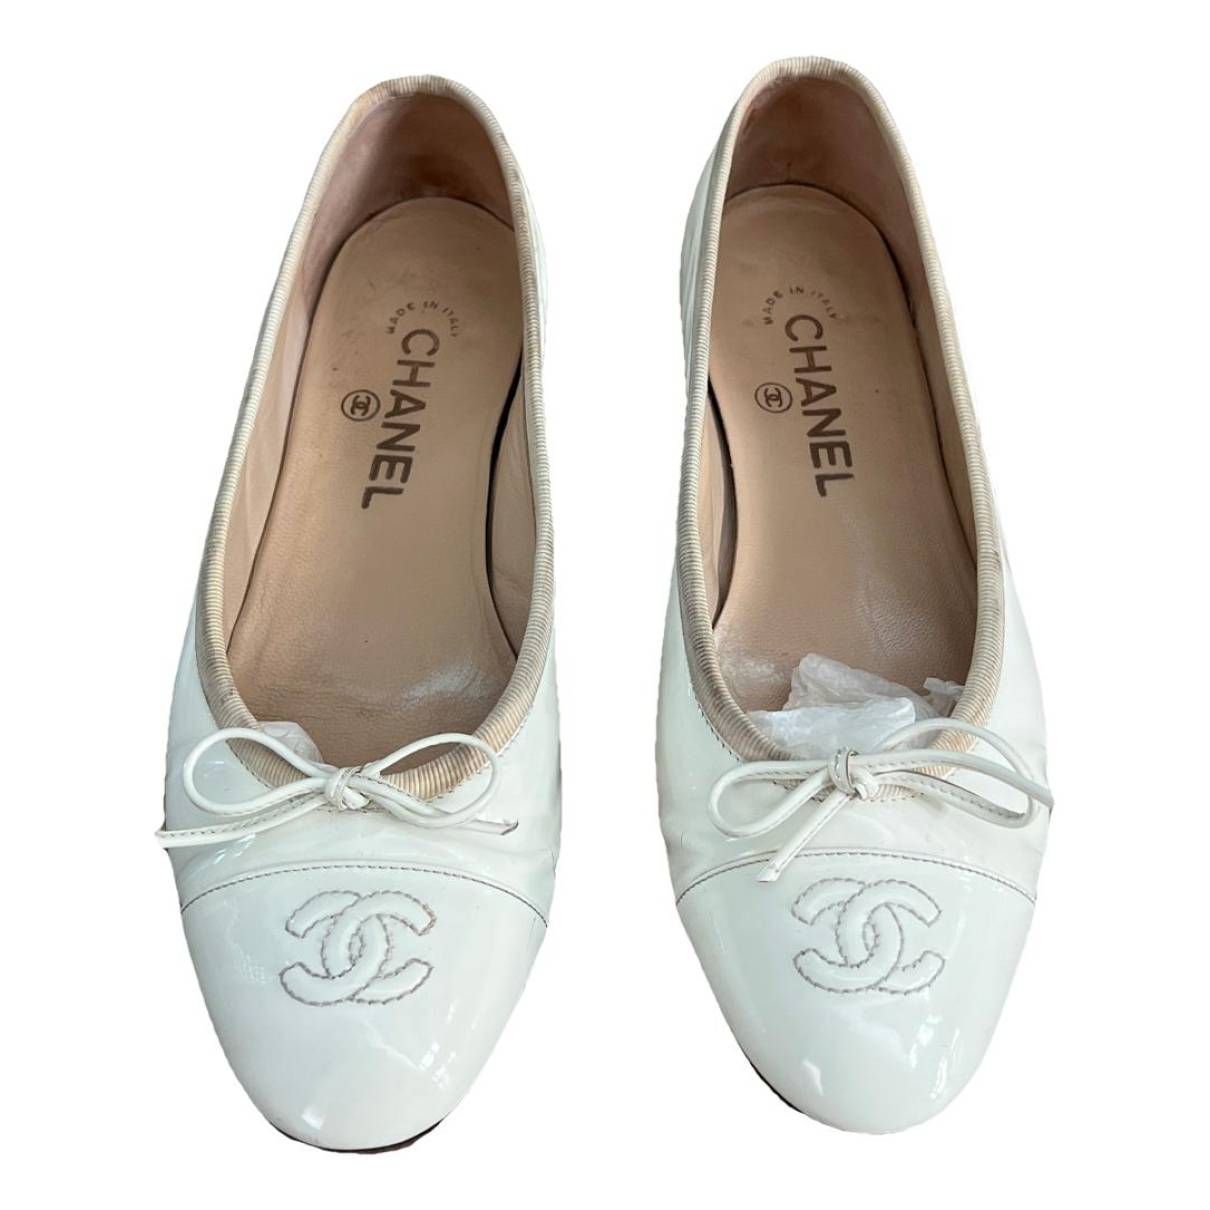 Patent leather ballet flats Chanel White size 37.5 EU in Patent